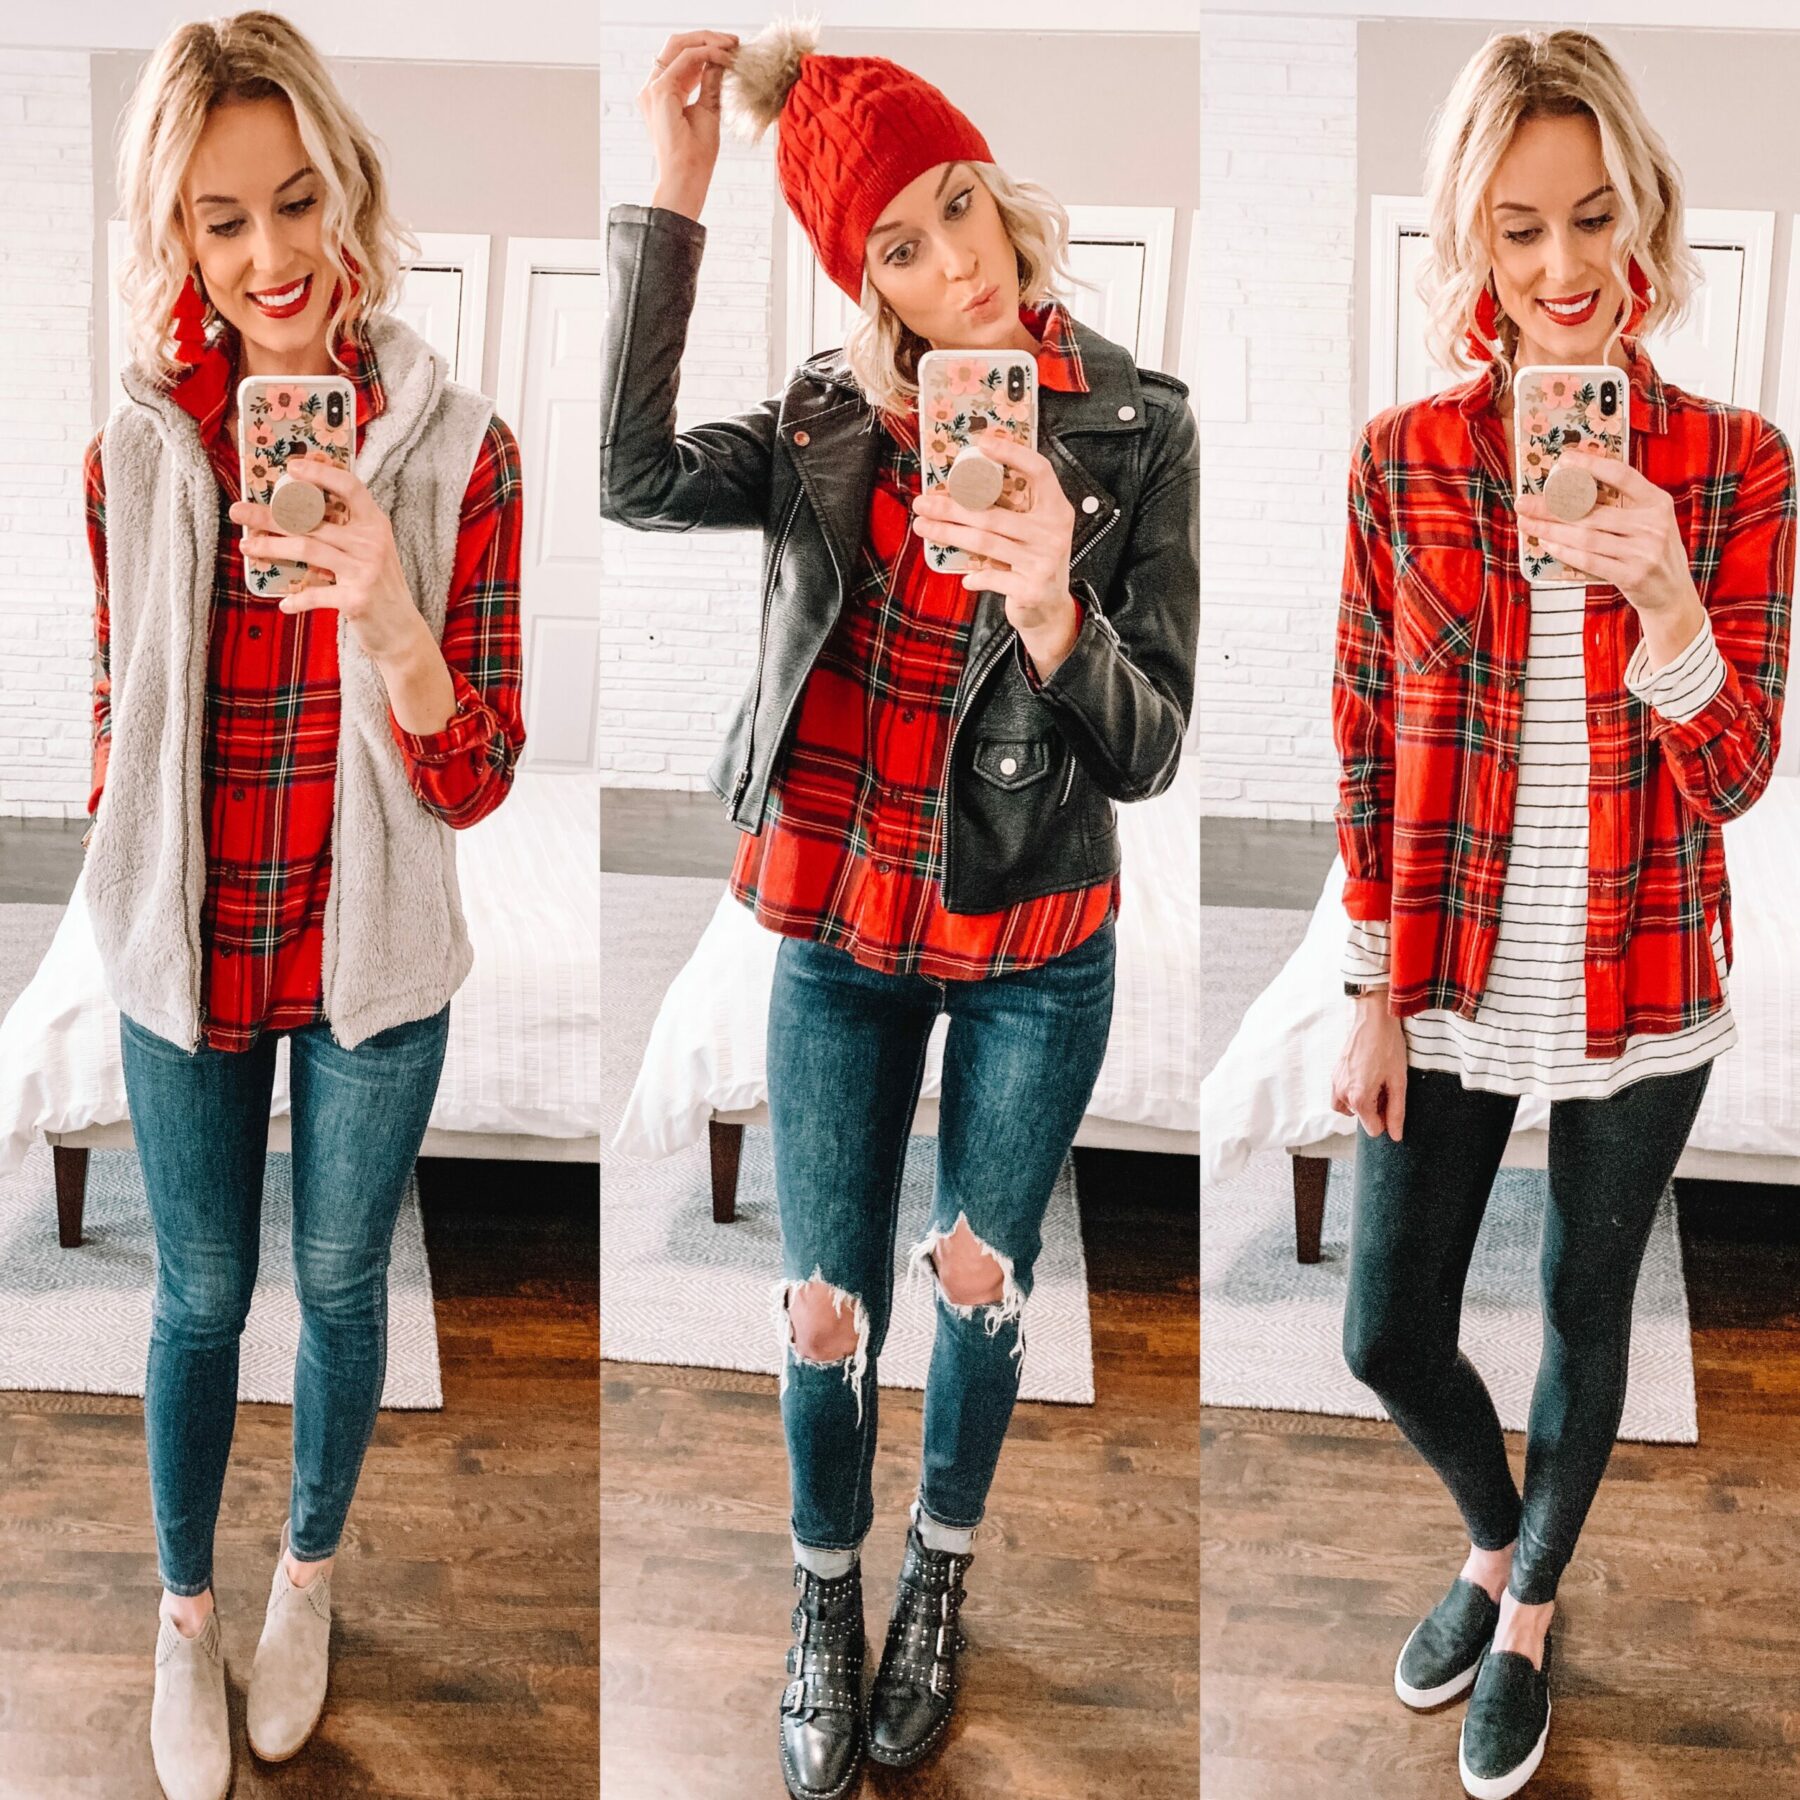 How to style a flannel shirt - 4 easy outfit ideas - rosey kate